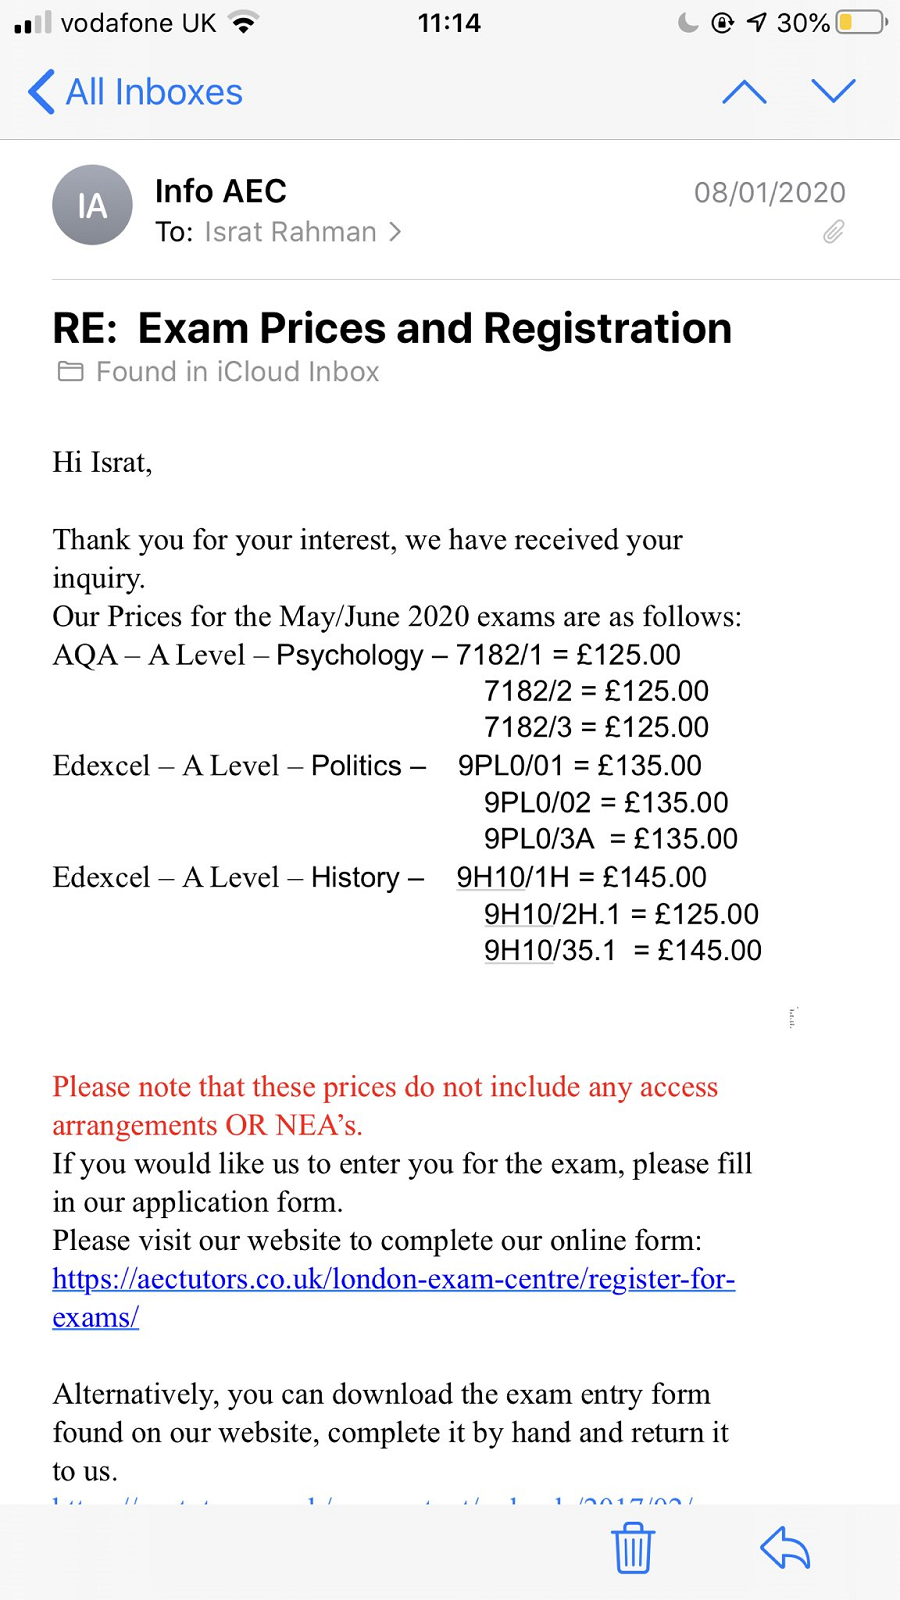 A Level Prices